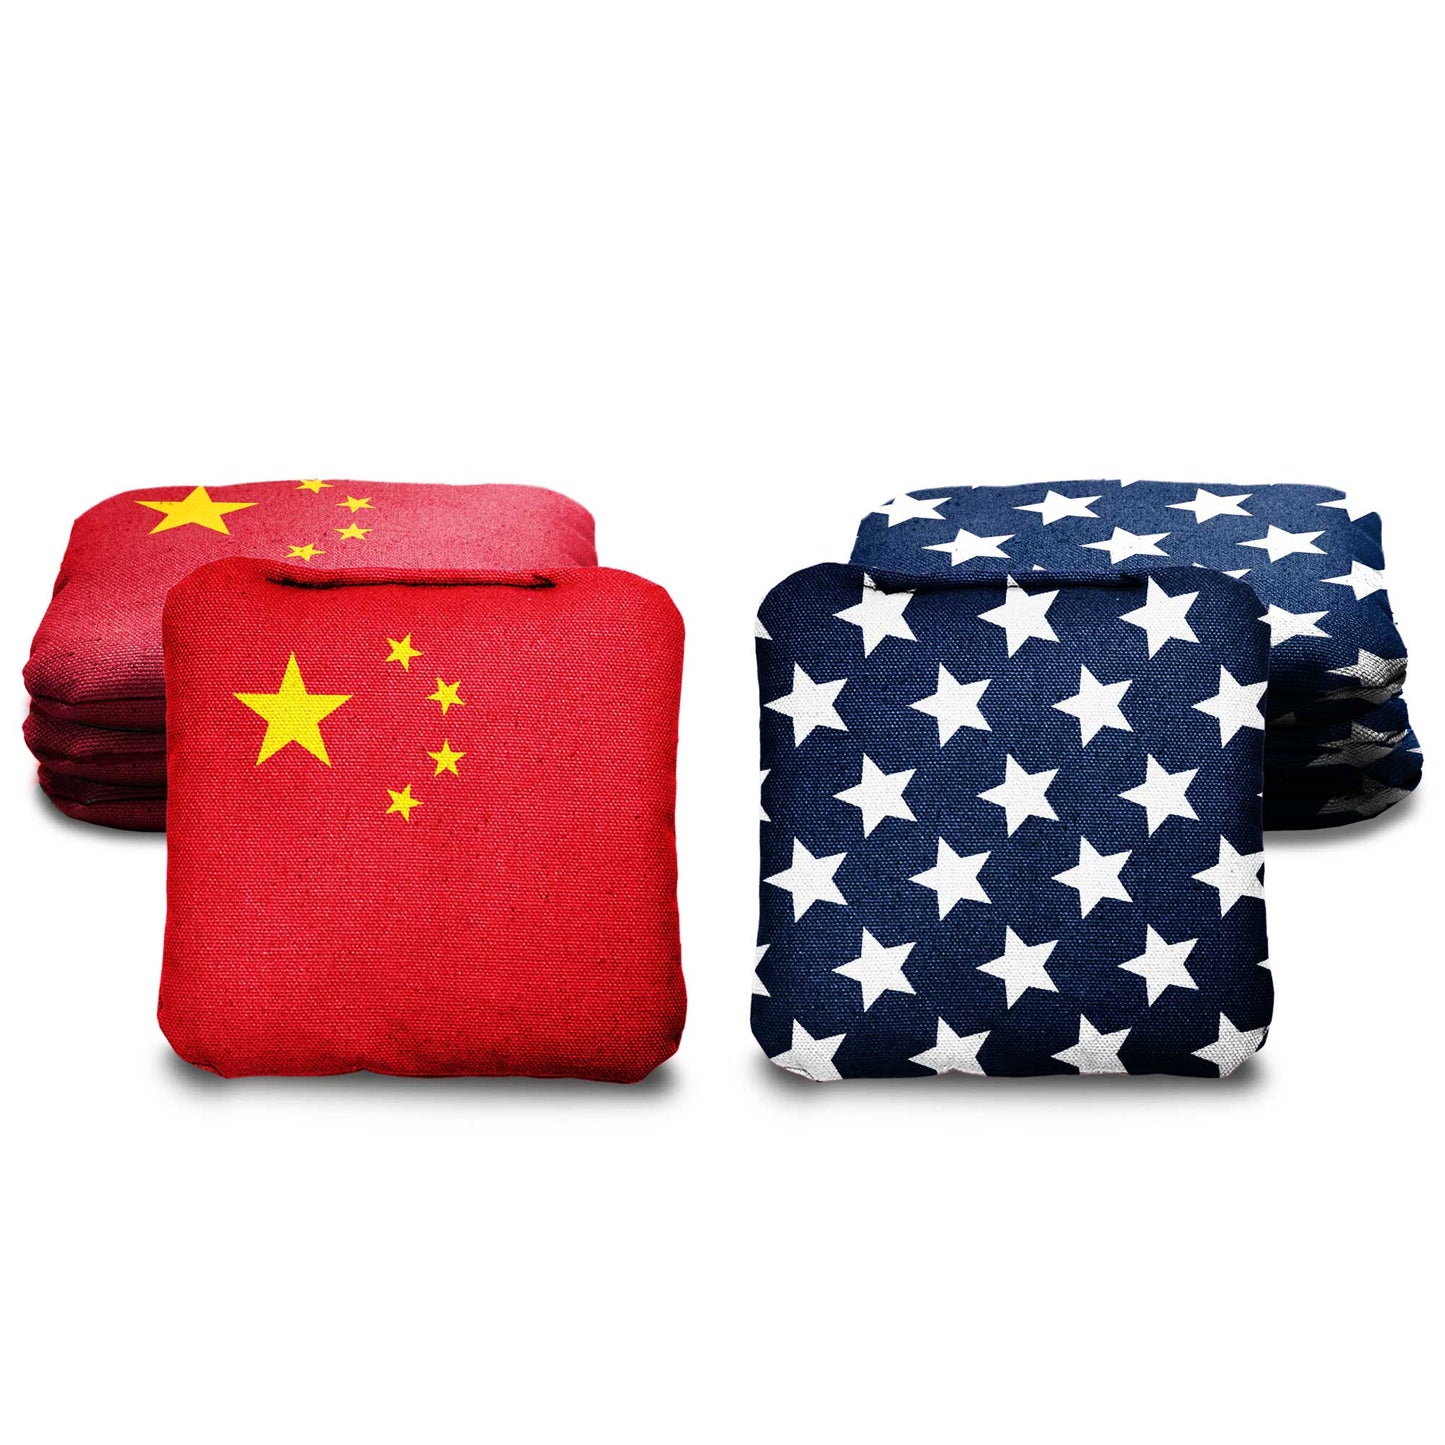 The Chinese and Mericas - 8 Cornhole Bags